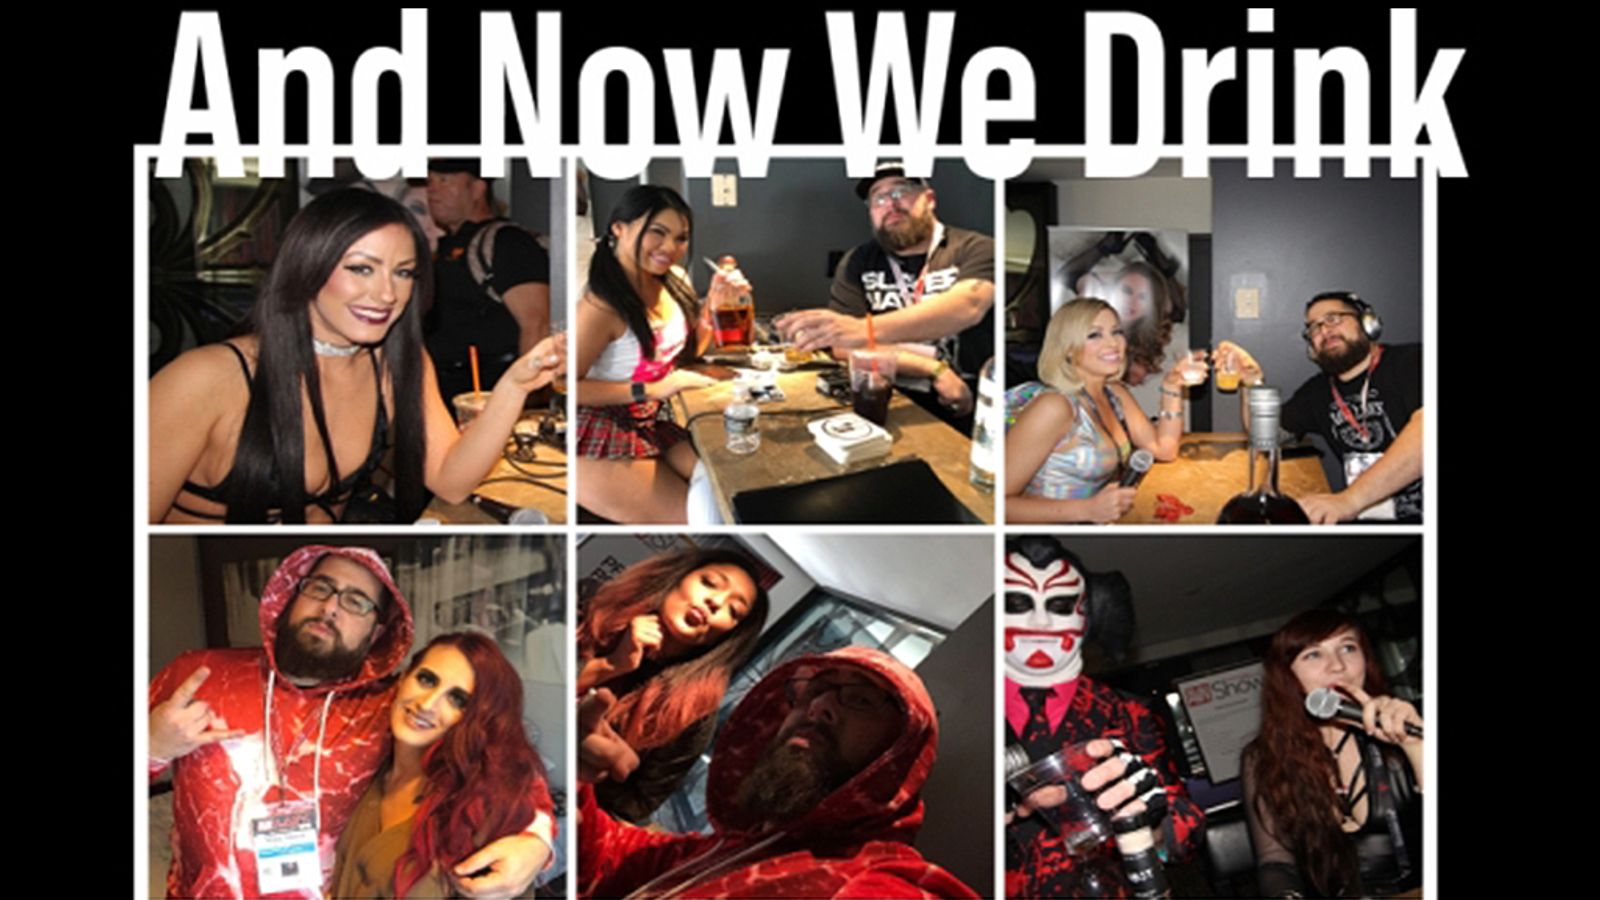 ‘And Now We Drink’ Podcast Celebrates Its 100th Episode At AEE